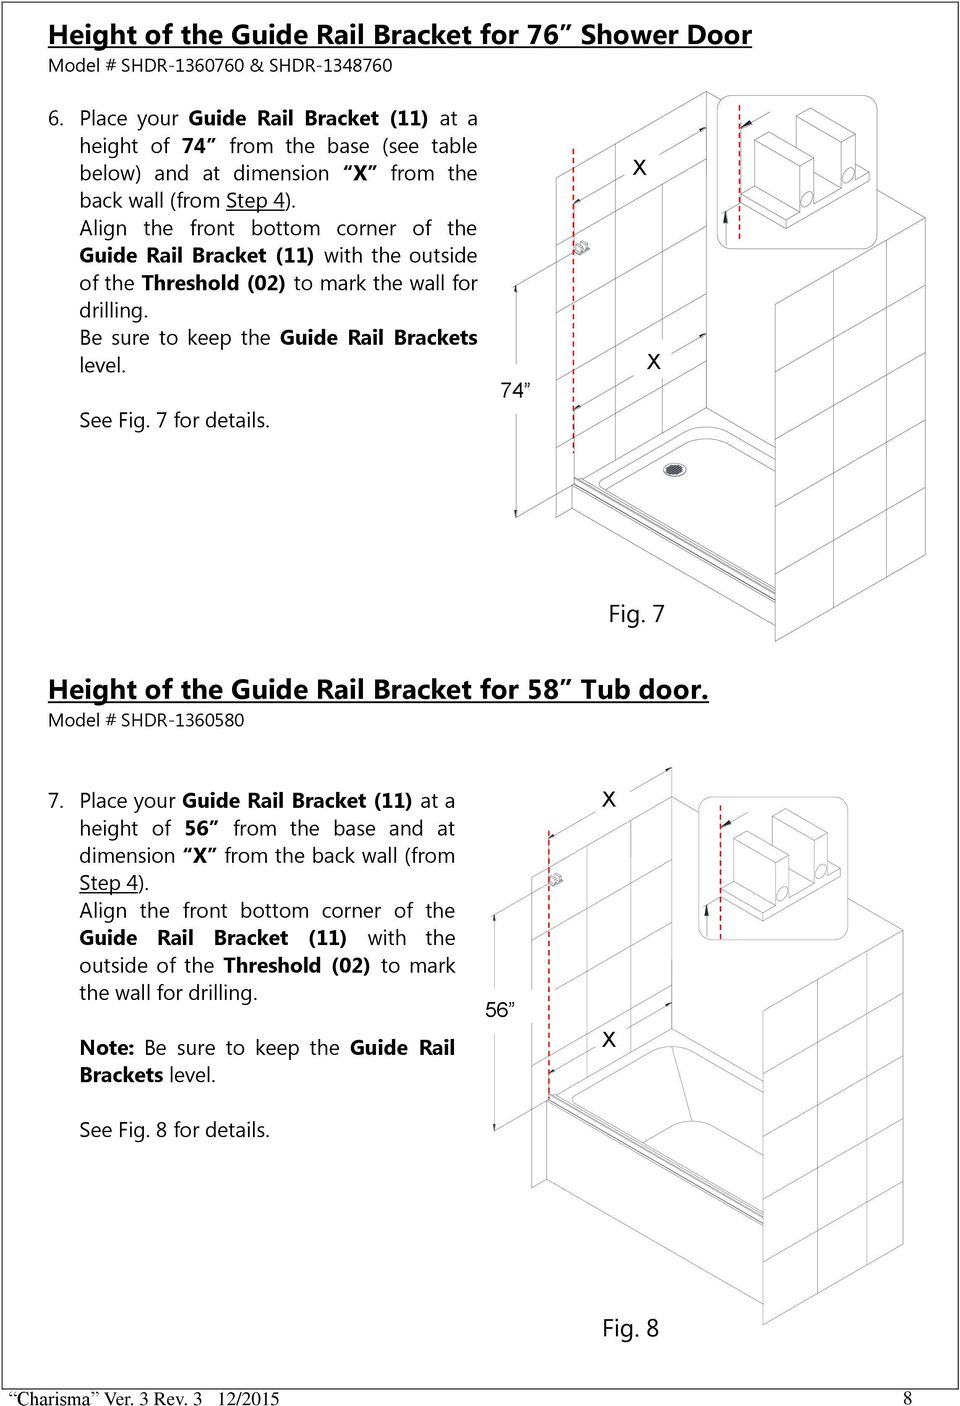 Align the front bottom corner of the Guide Rail Bracket (11) with the outside of the Threshold (02) to mark the wall for drilling. Be sure to keep the Guide Rail Brackets level. See Fig.